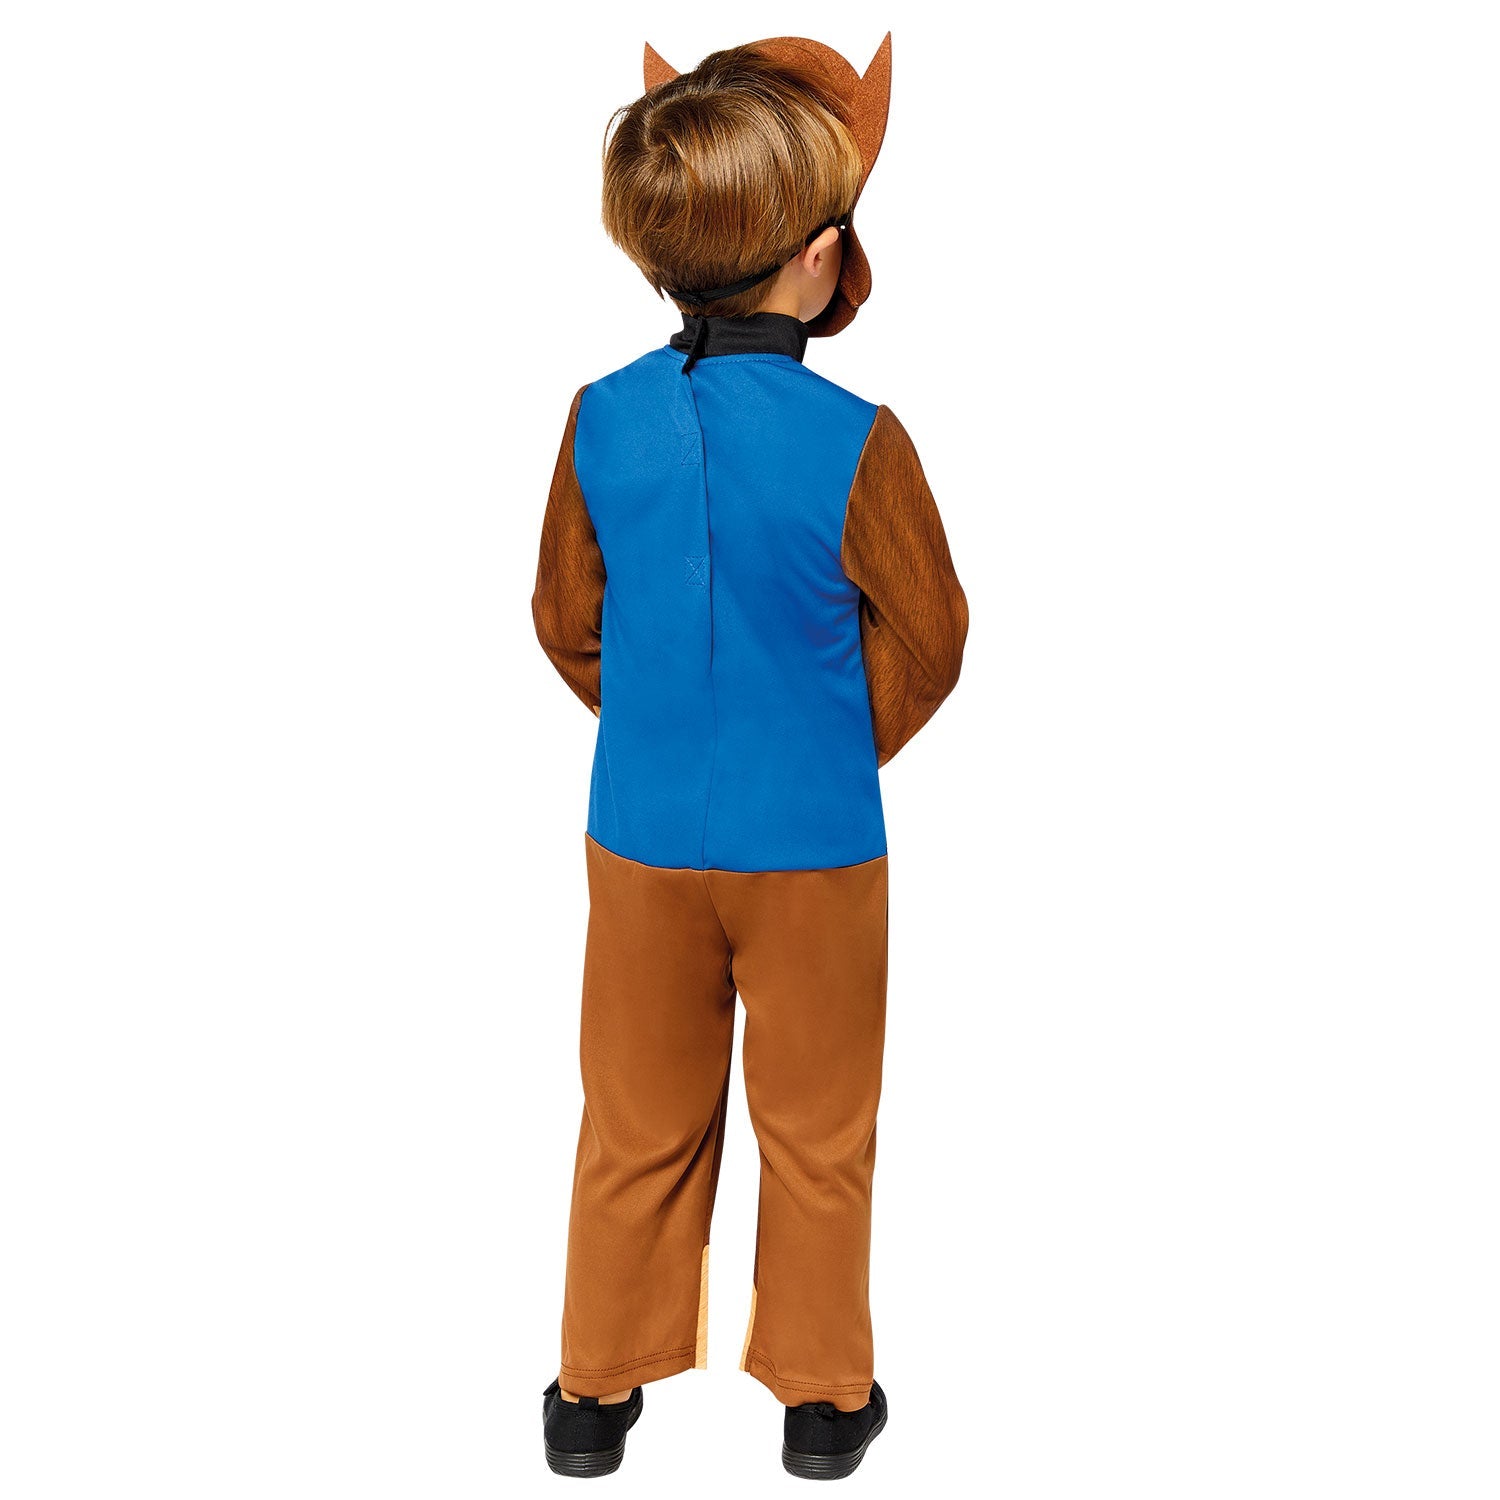 Paw Patrol Chase Costume includes jumpsuit and hat